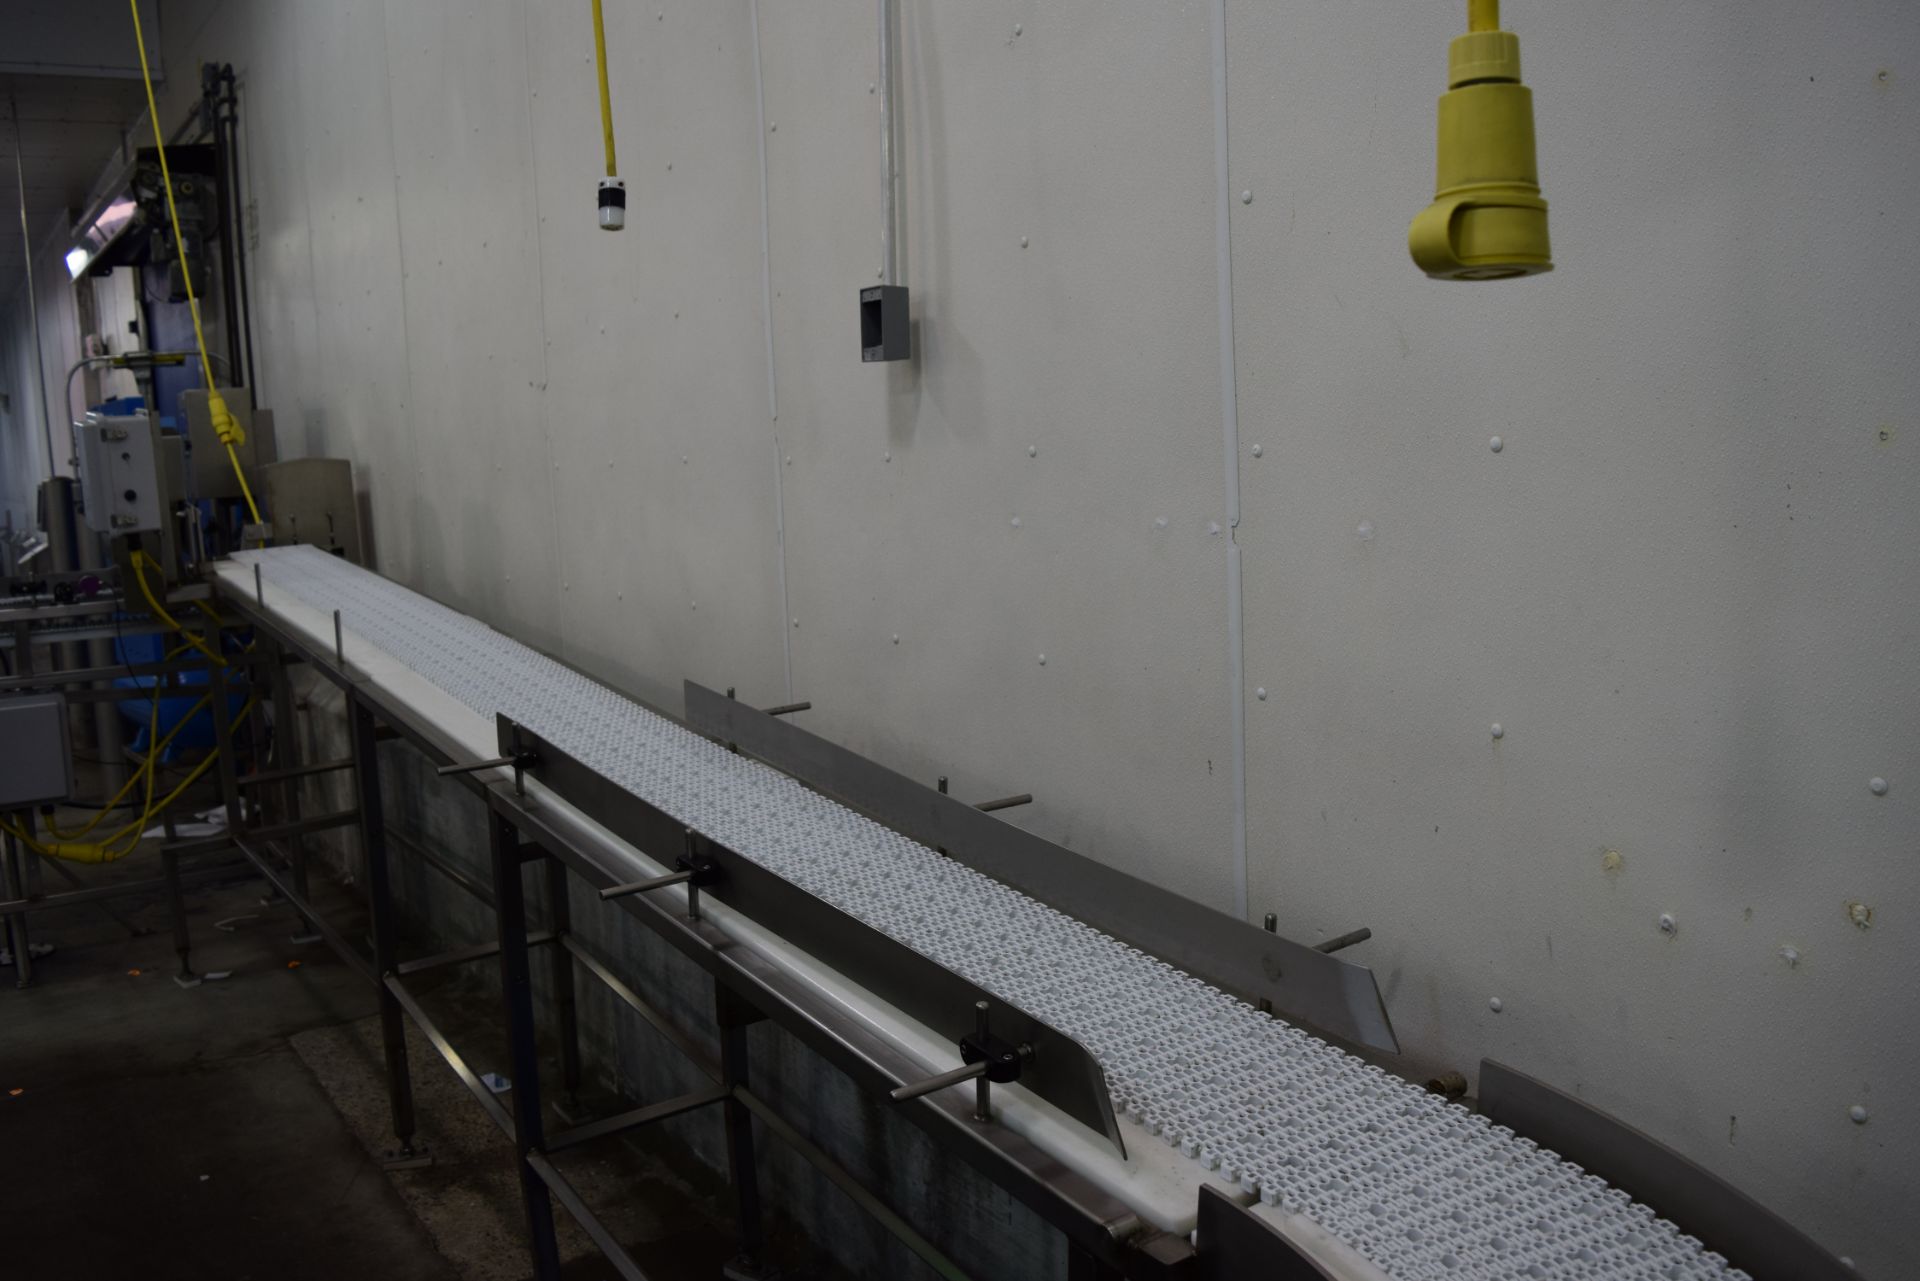 10" x 222" S/S Frame Product Conveyor with 90 Degree Turn, Interlox Belt and Drive